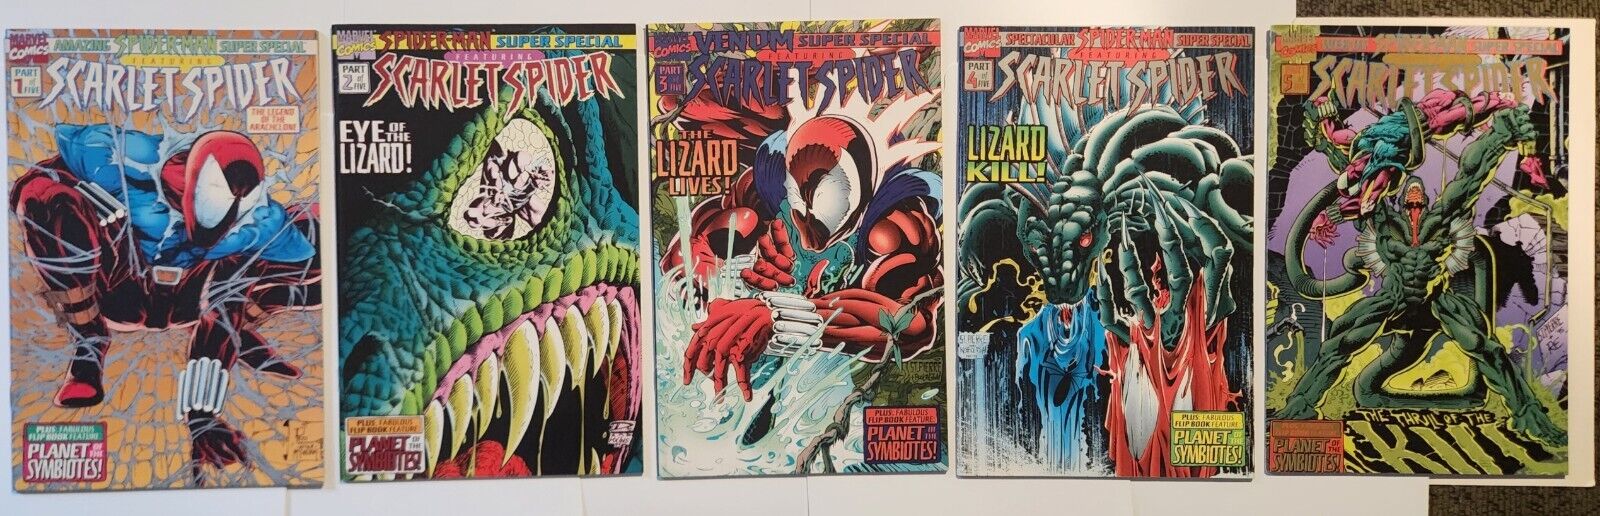 Spider-Man Planet of the Symbiotes Parts 1-5 Scarlet Spider Comic Lot